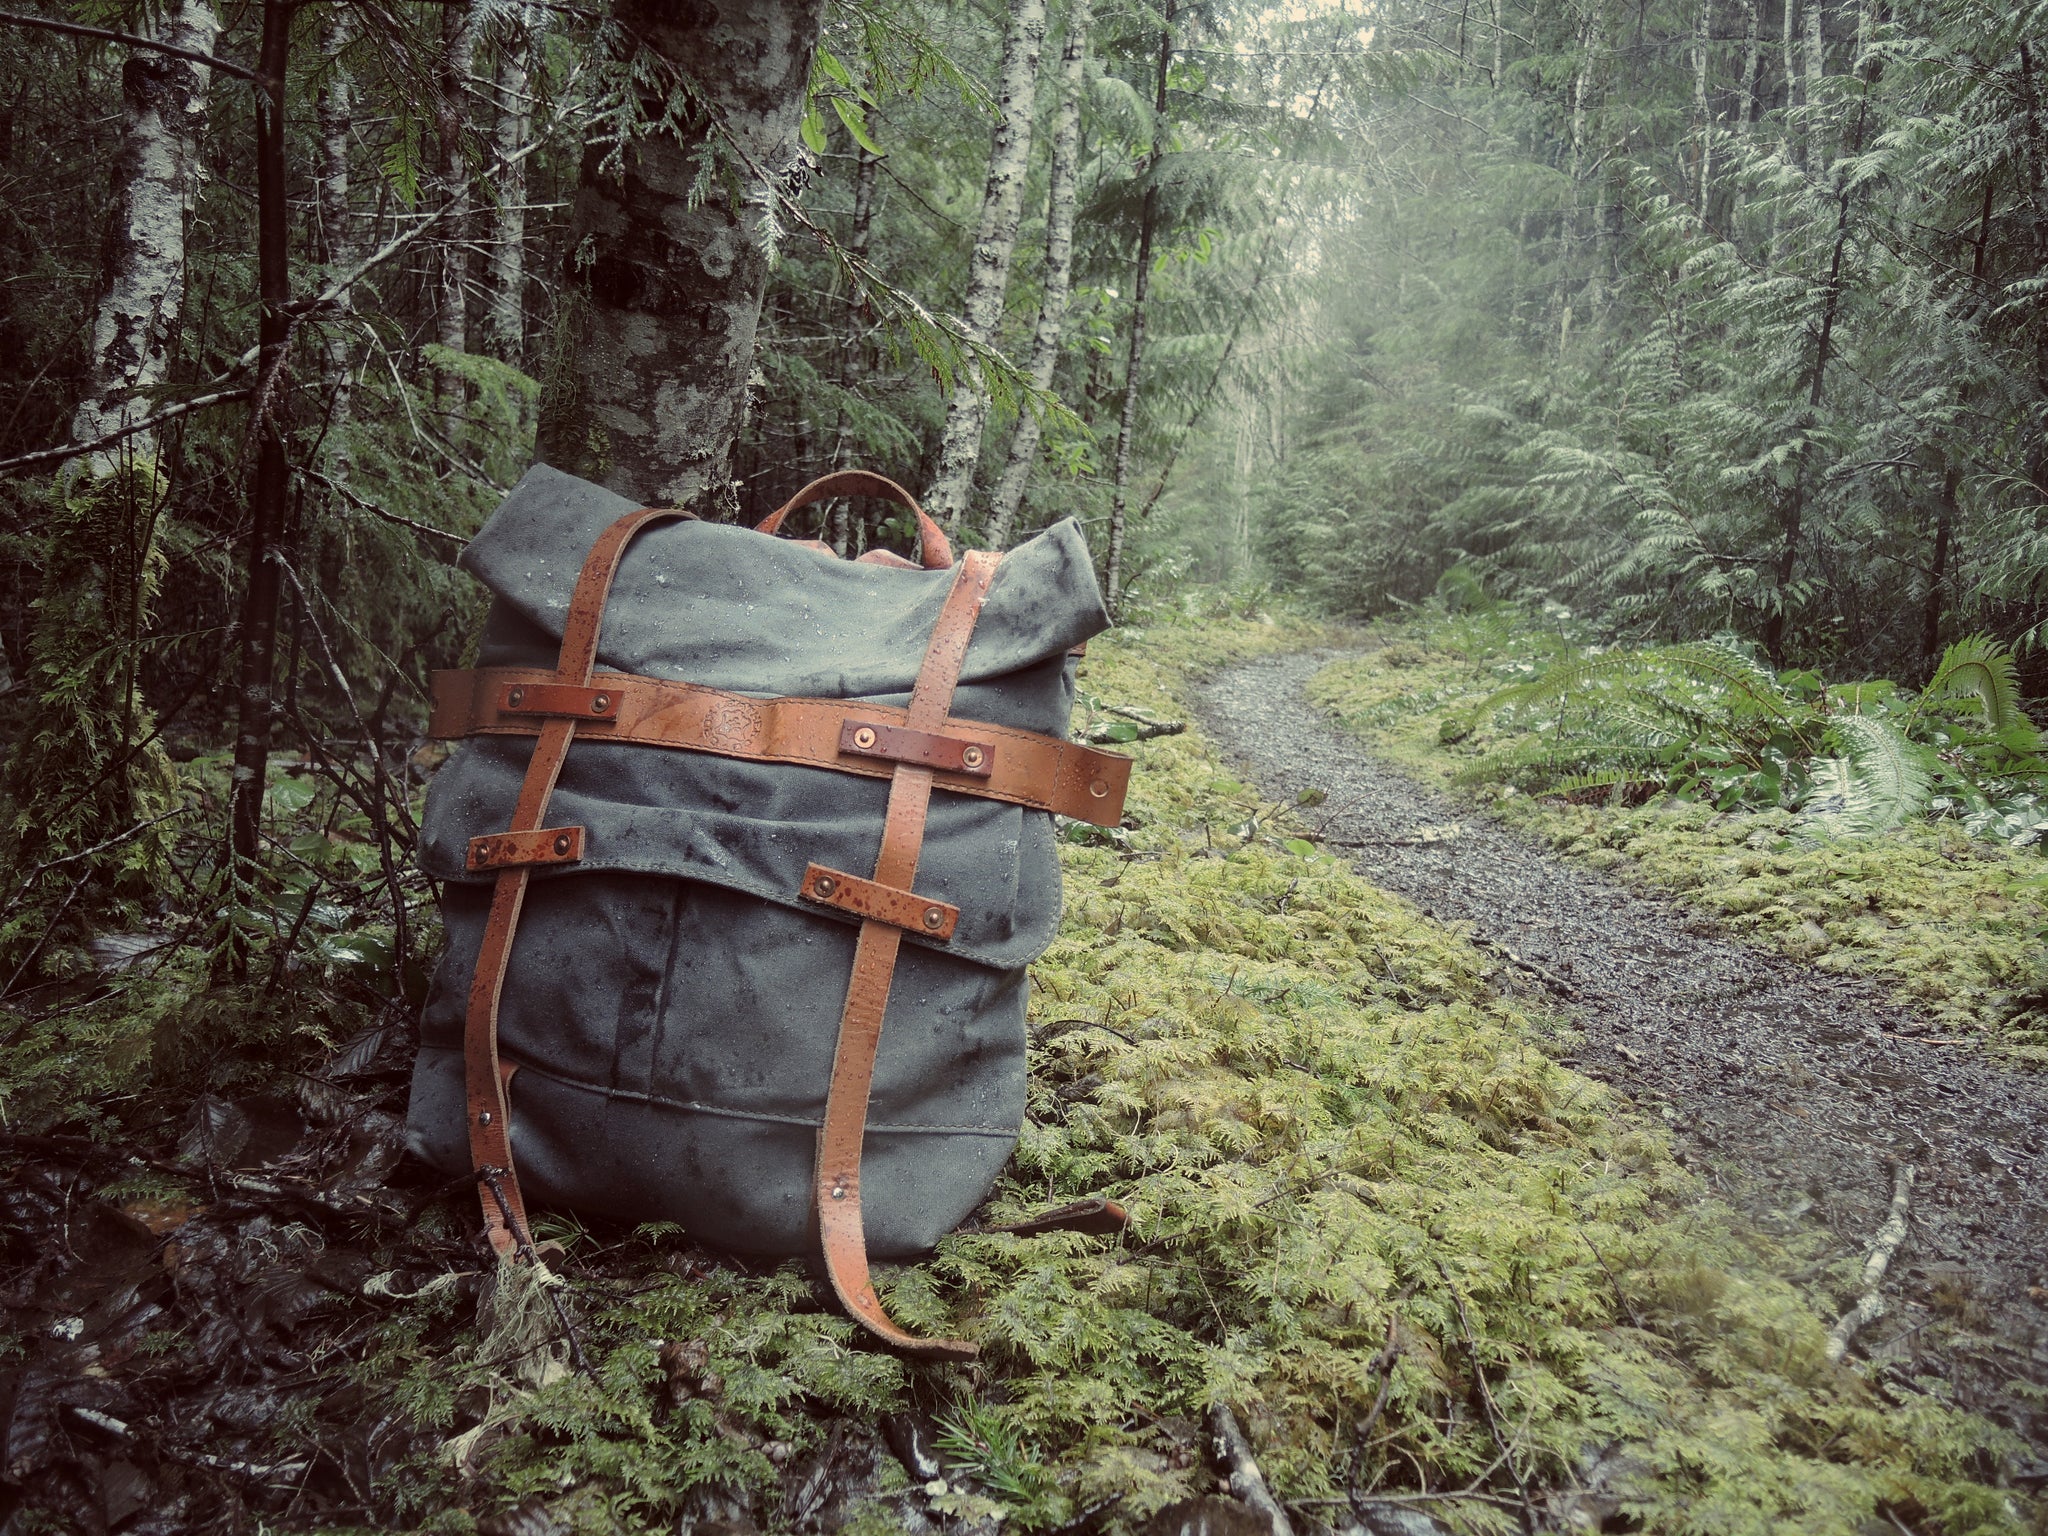 Parva Rucksack at Mt. Rainier National Park.  Hand crafted high quality leather goods in nature!